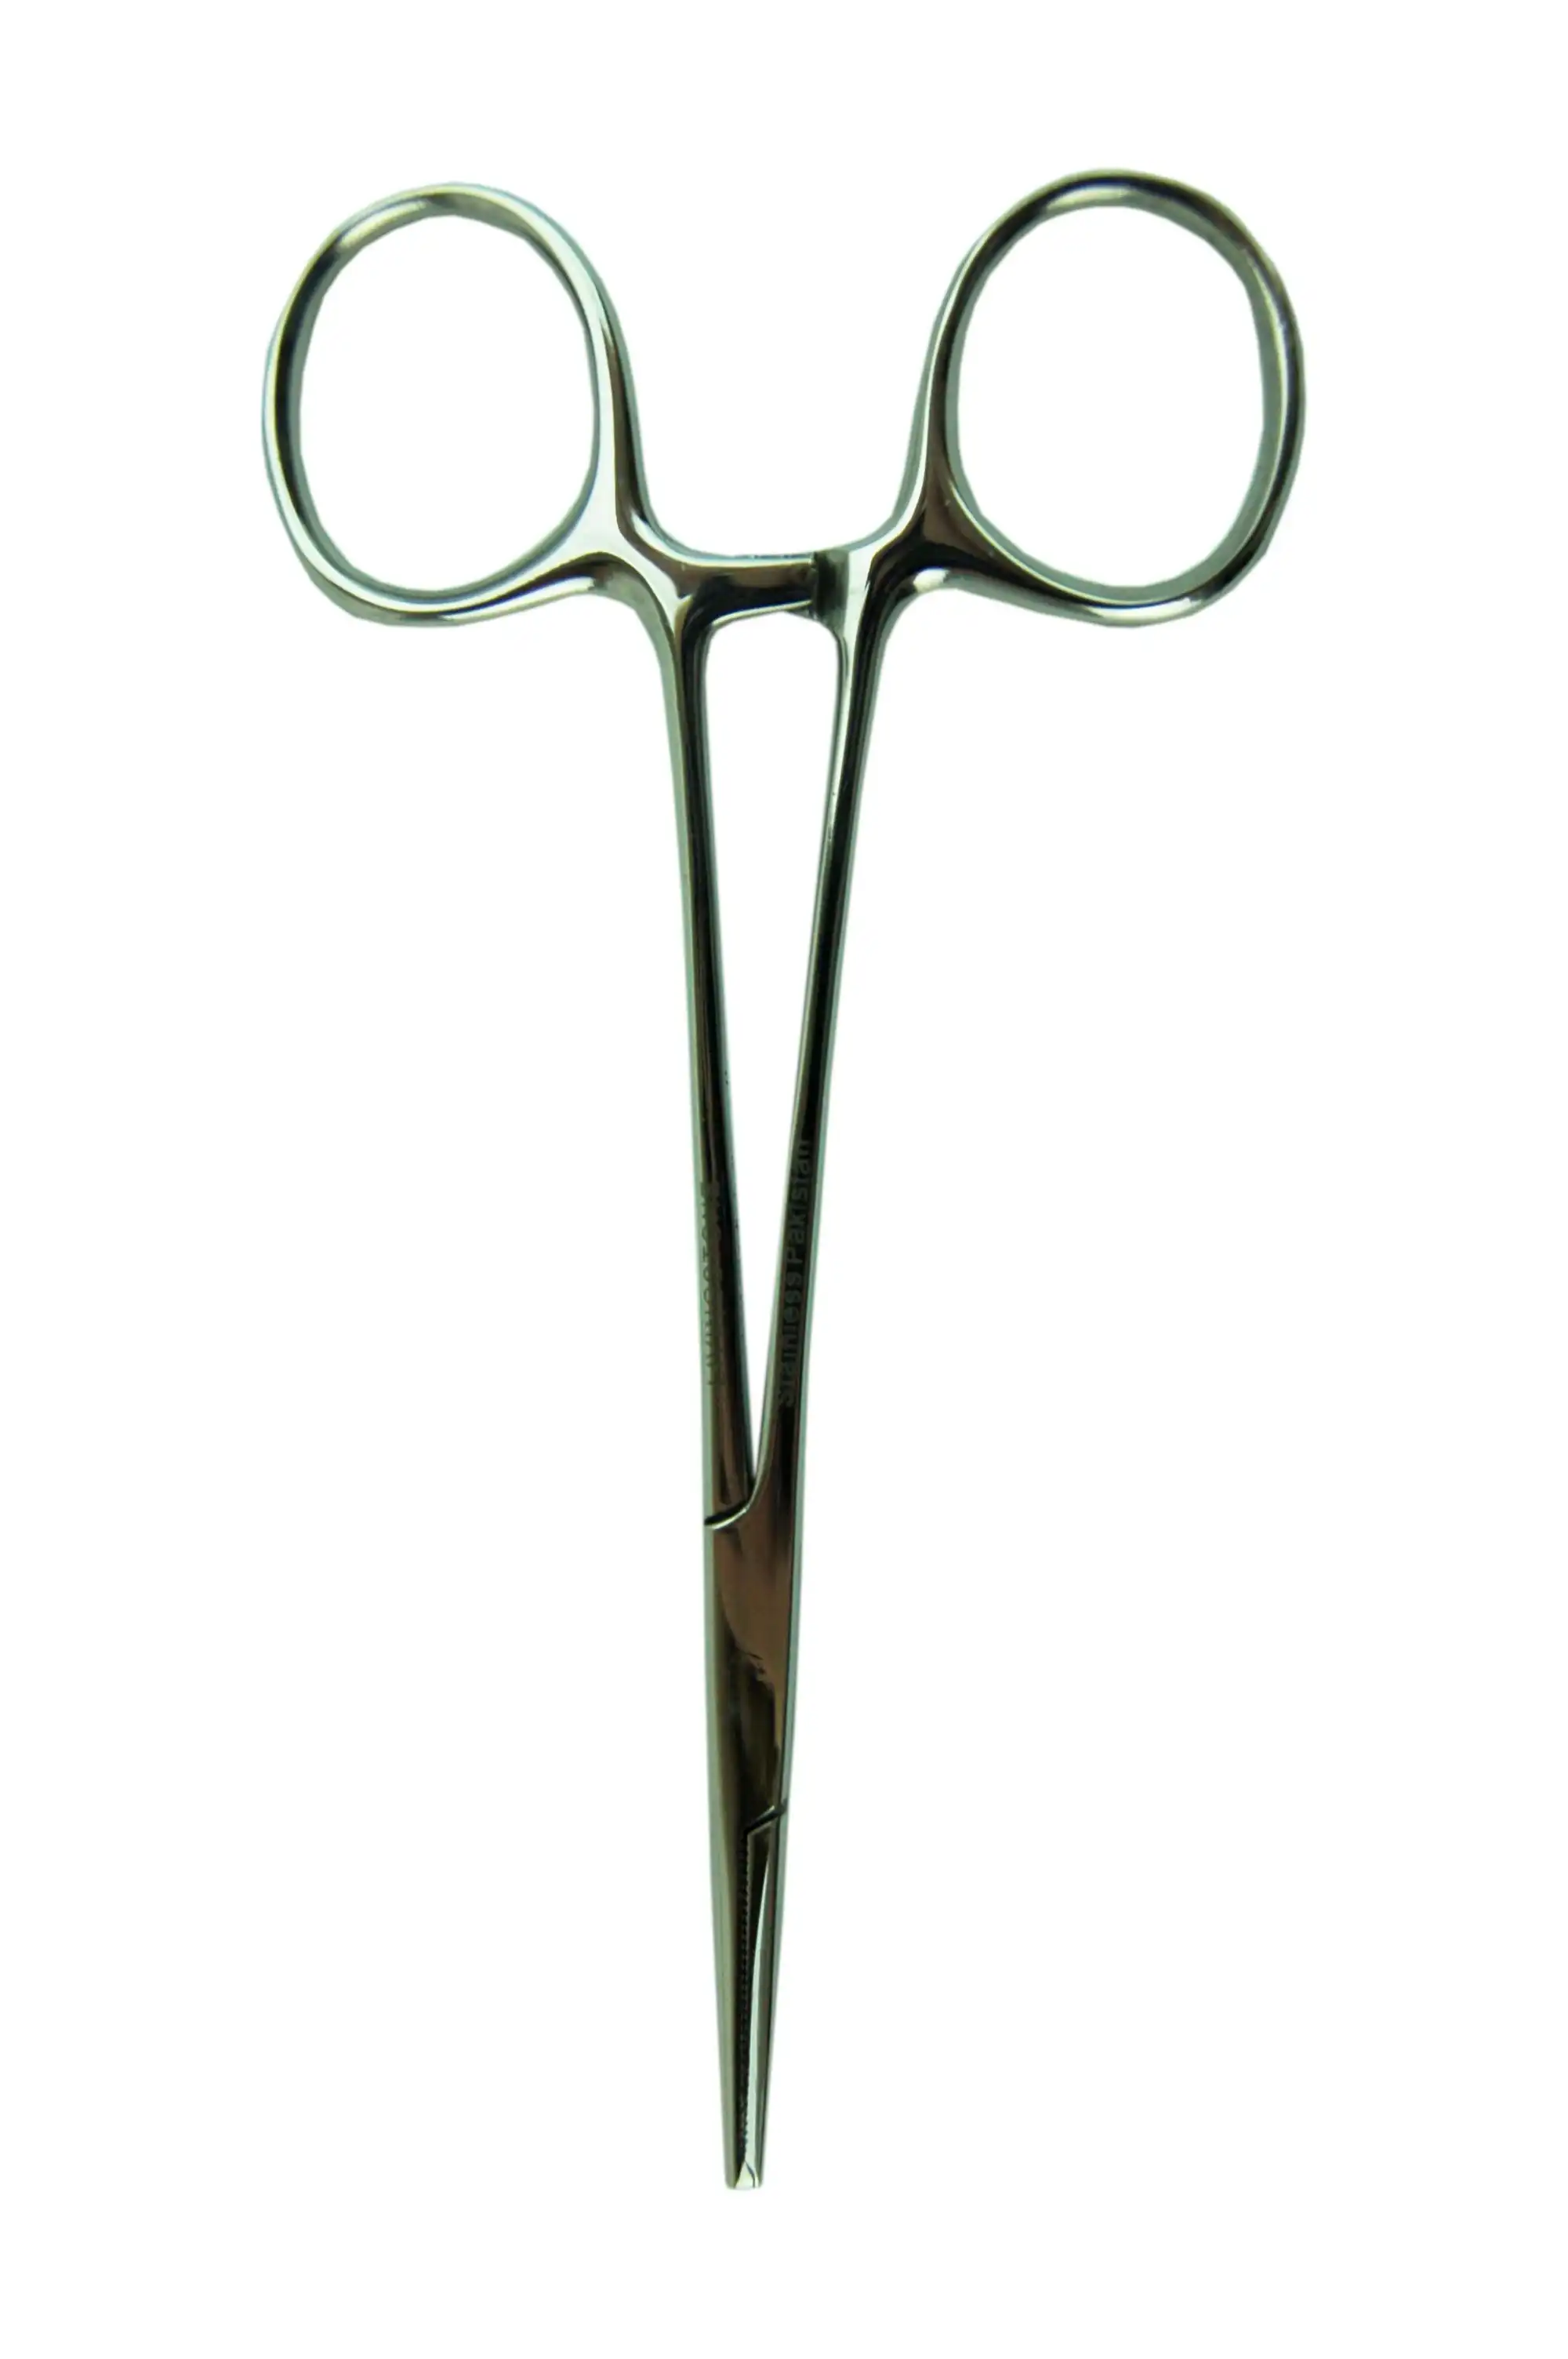 Livingstone Halsted Mosquito Haemostatic Artery Forceps 12.5cm 1 x 2 Teeth Straight Stainless Steel